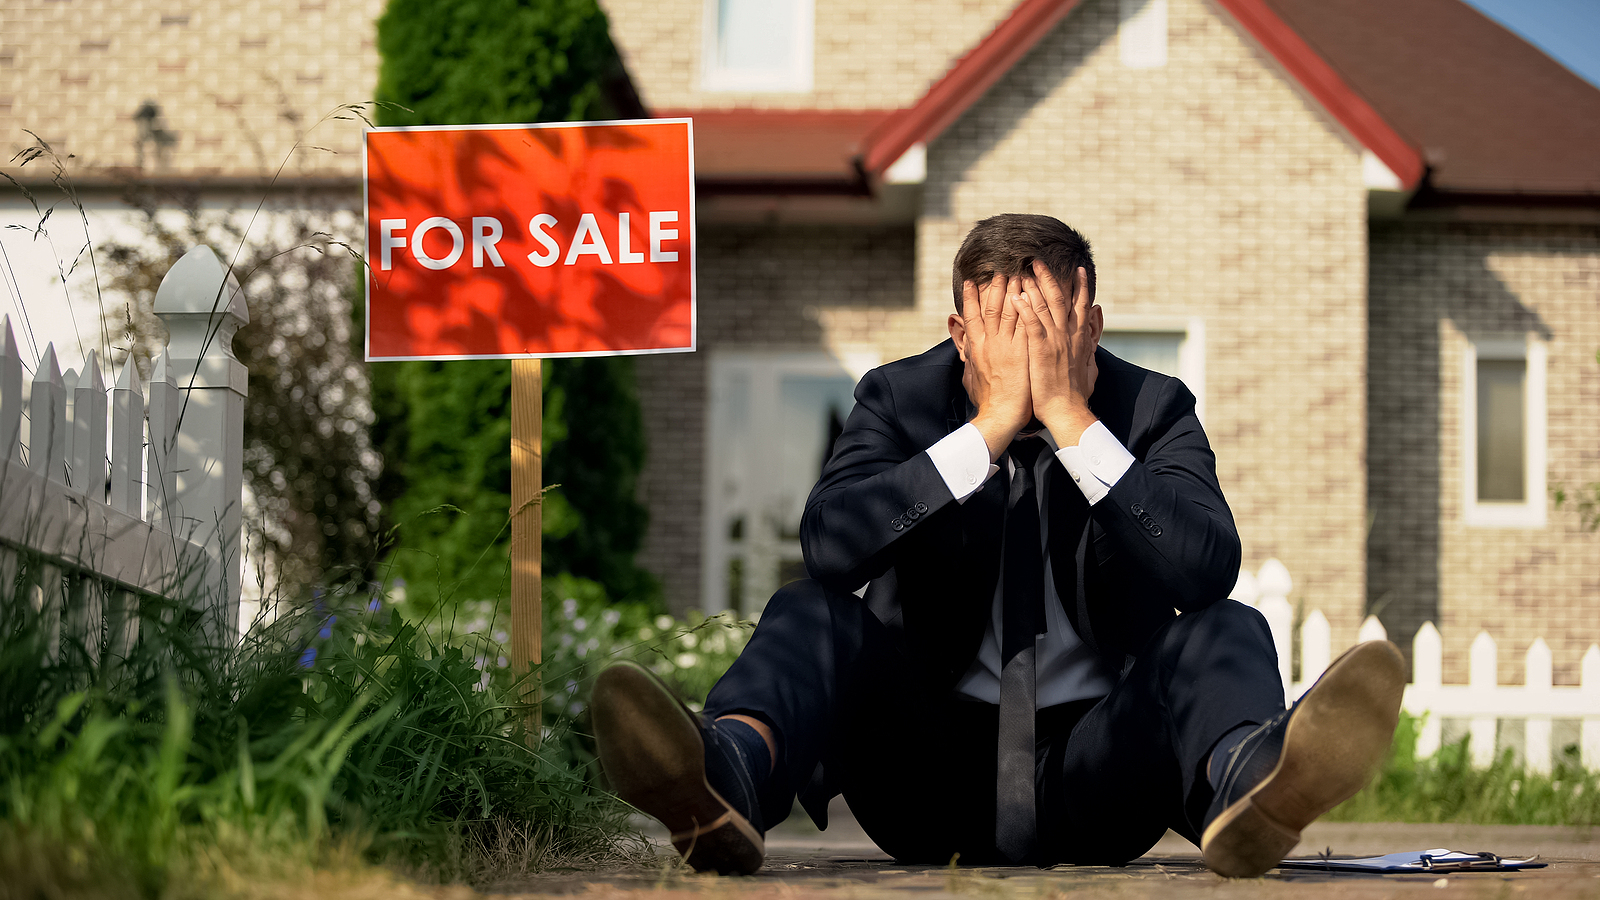 What Should Be Your Next Steps After A Failed House Sale?